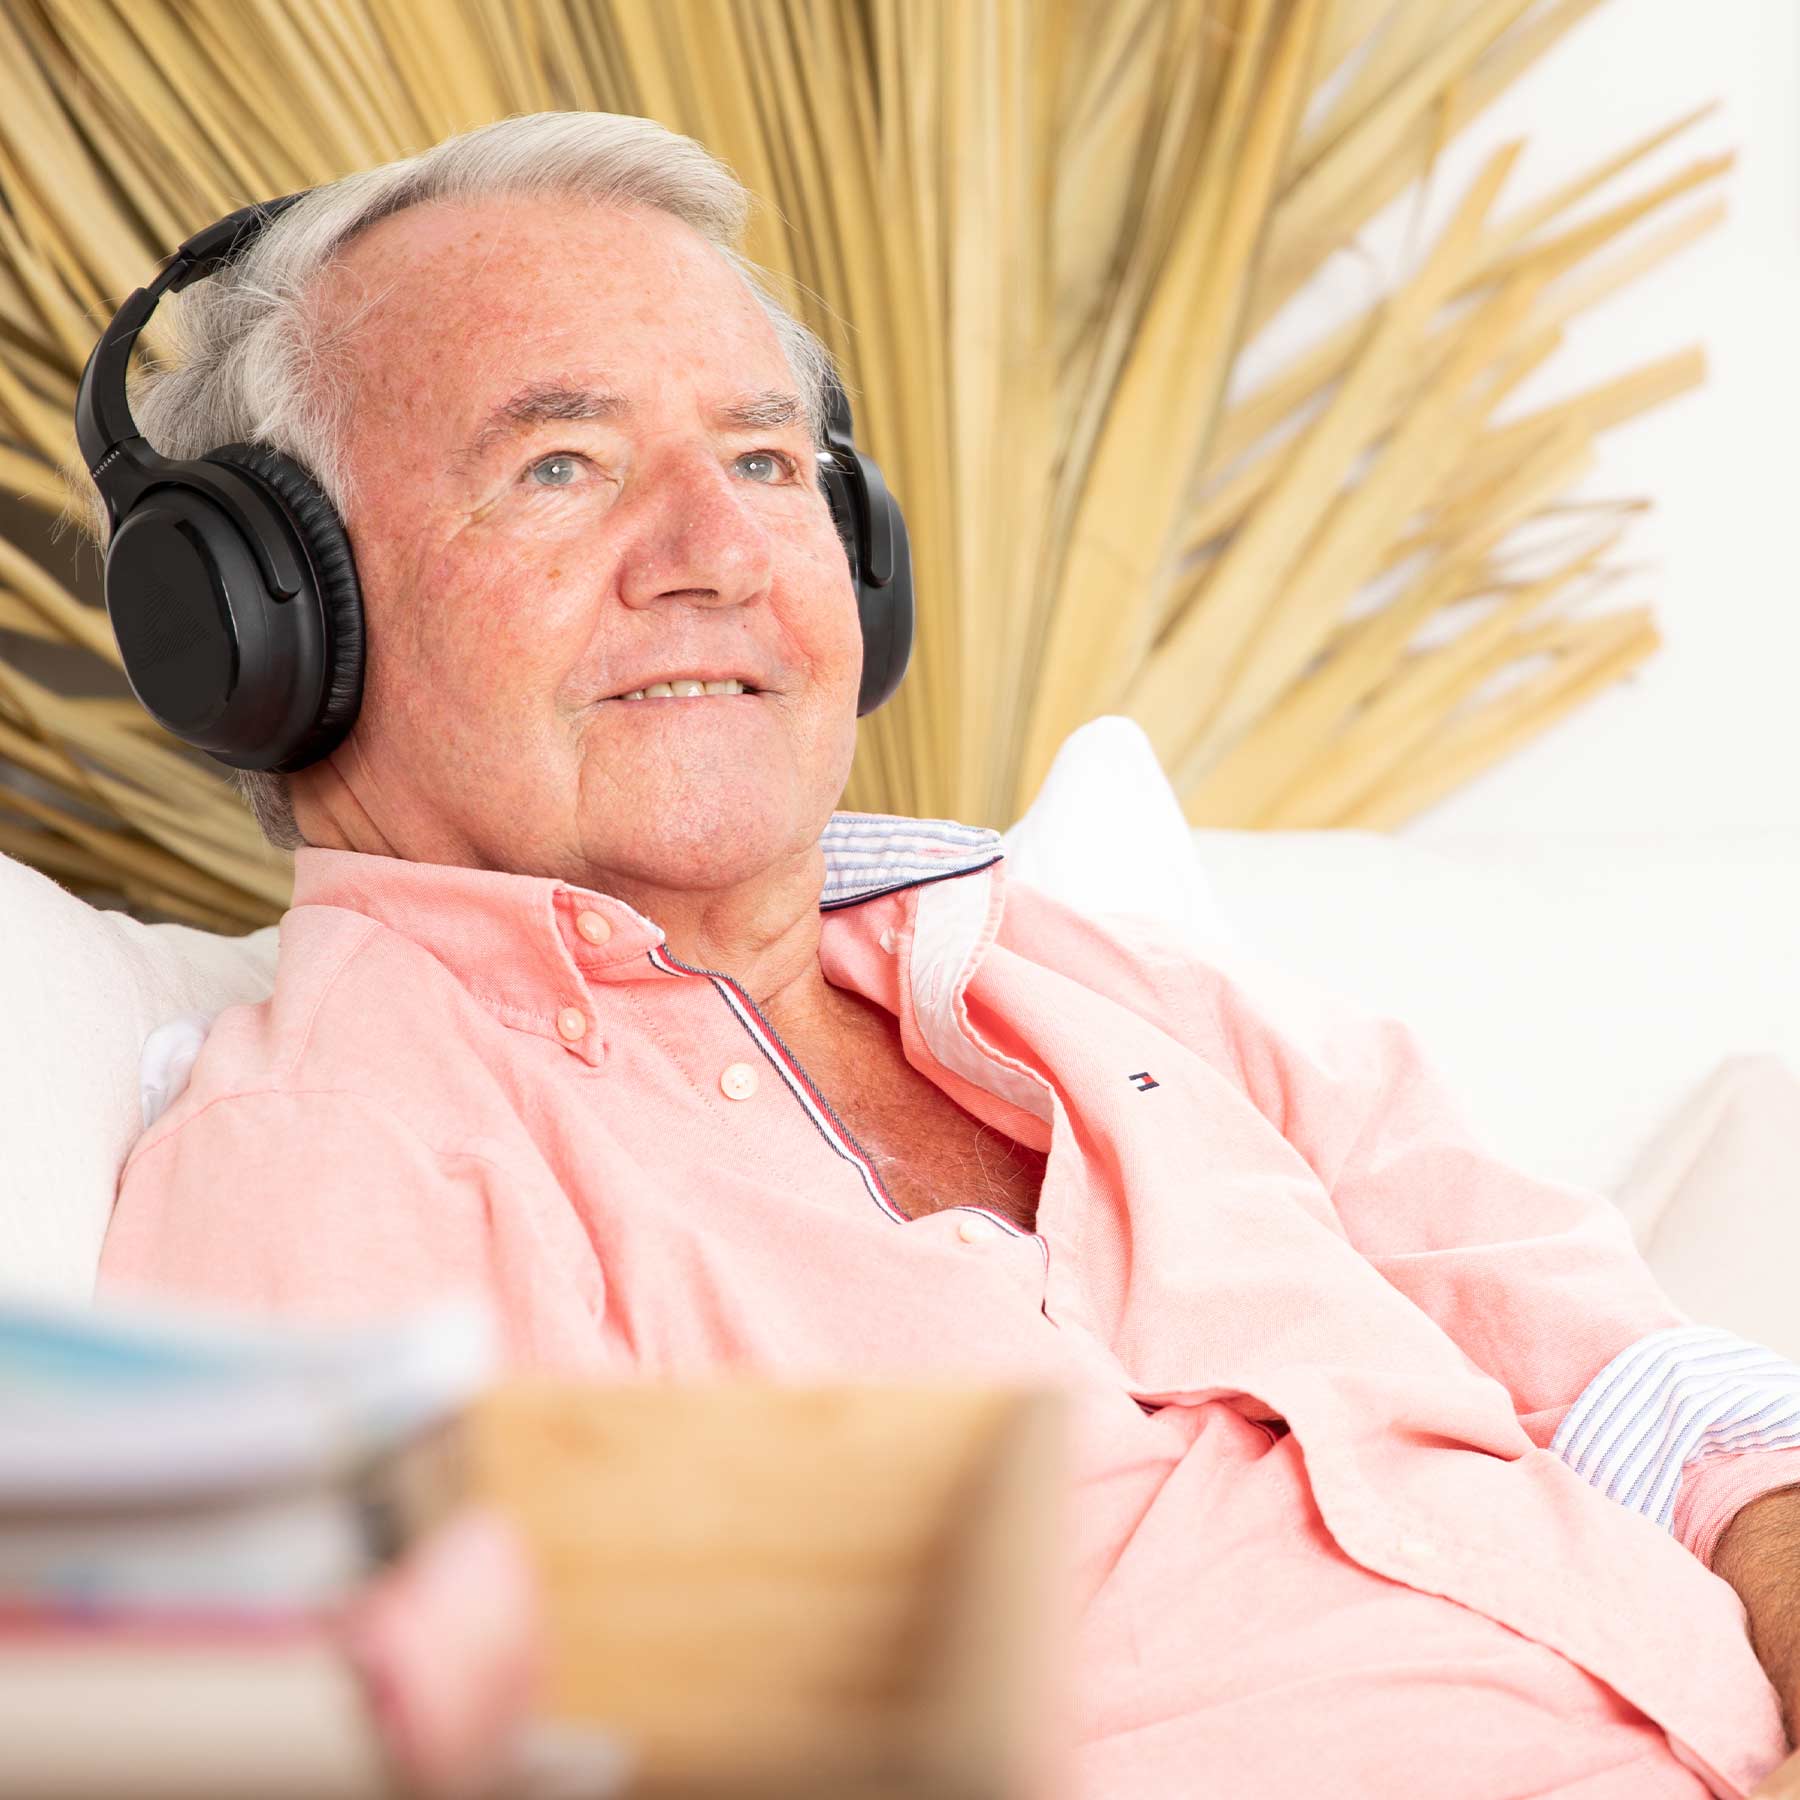 A man smiling contently sitting on the couch while listening to music on his Audeara headphones